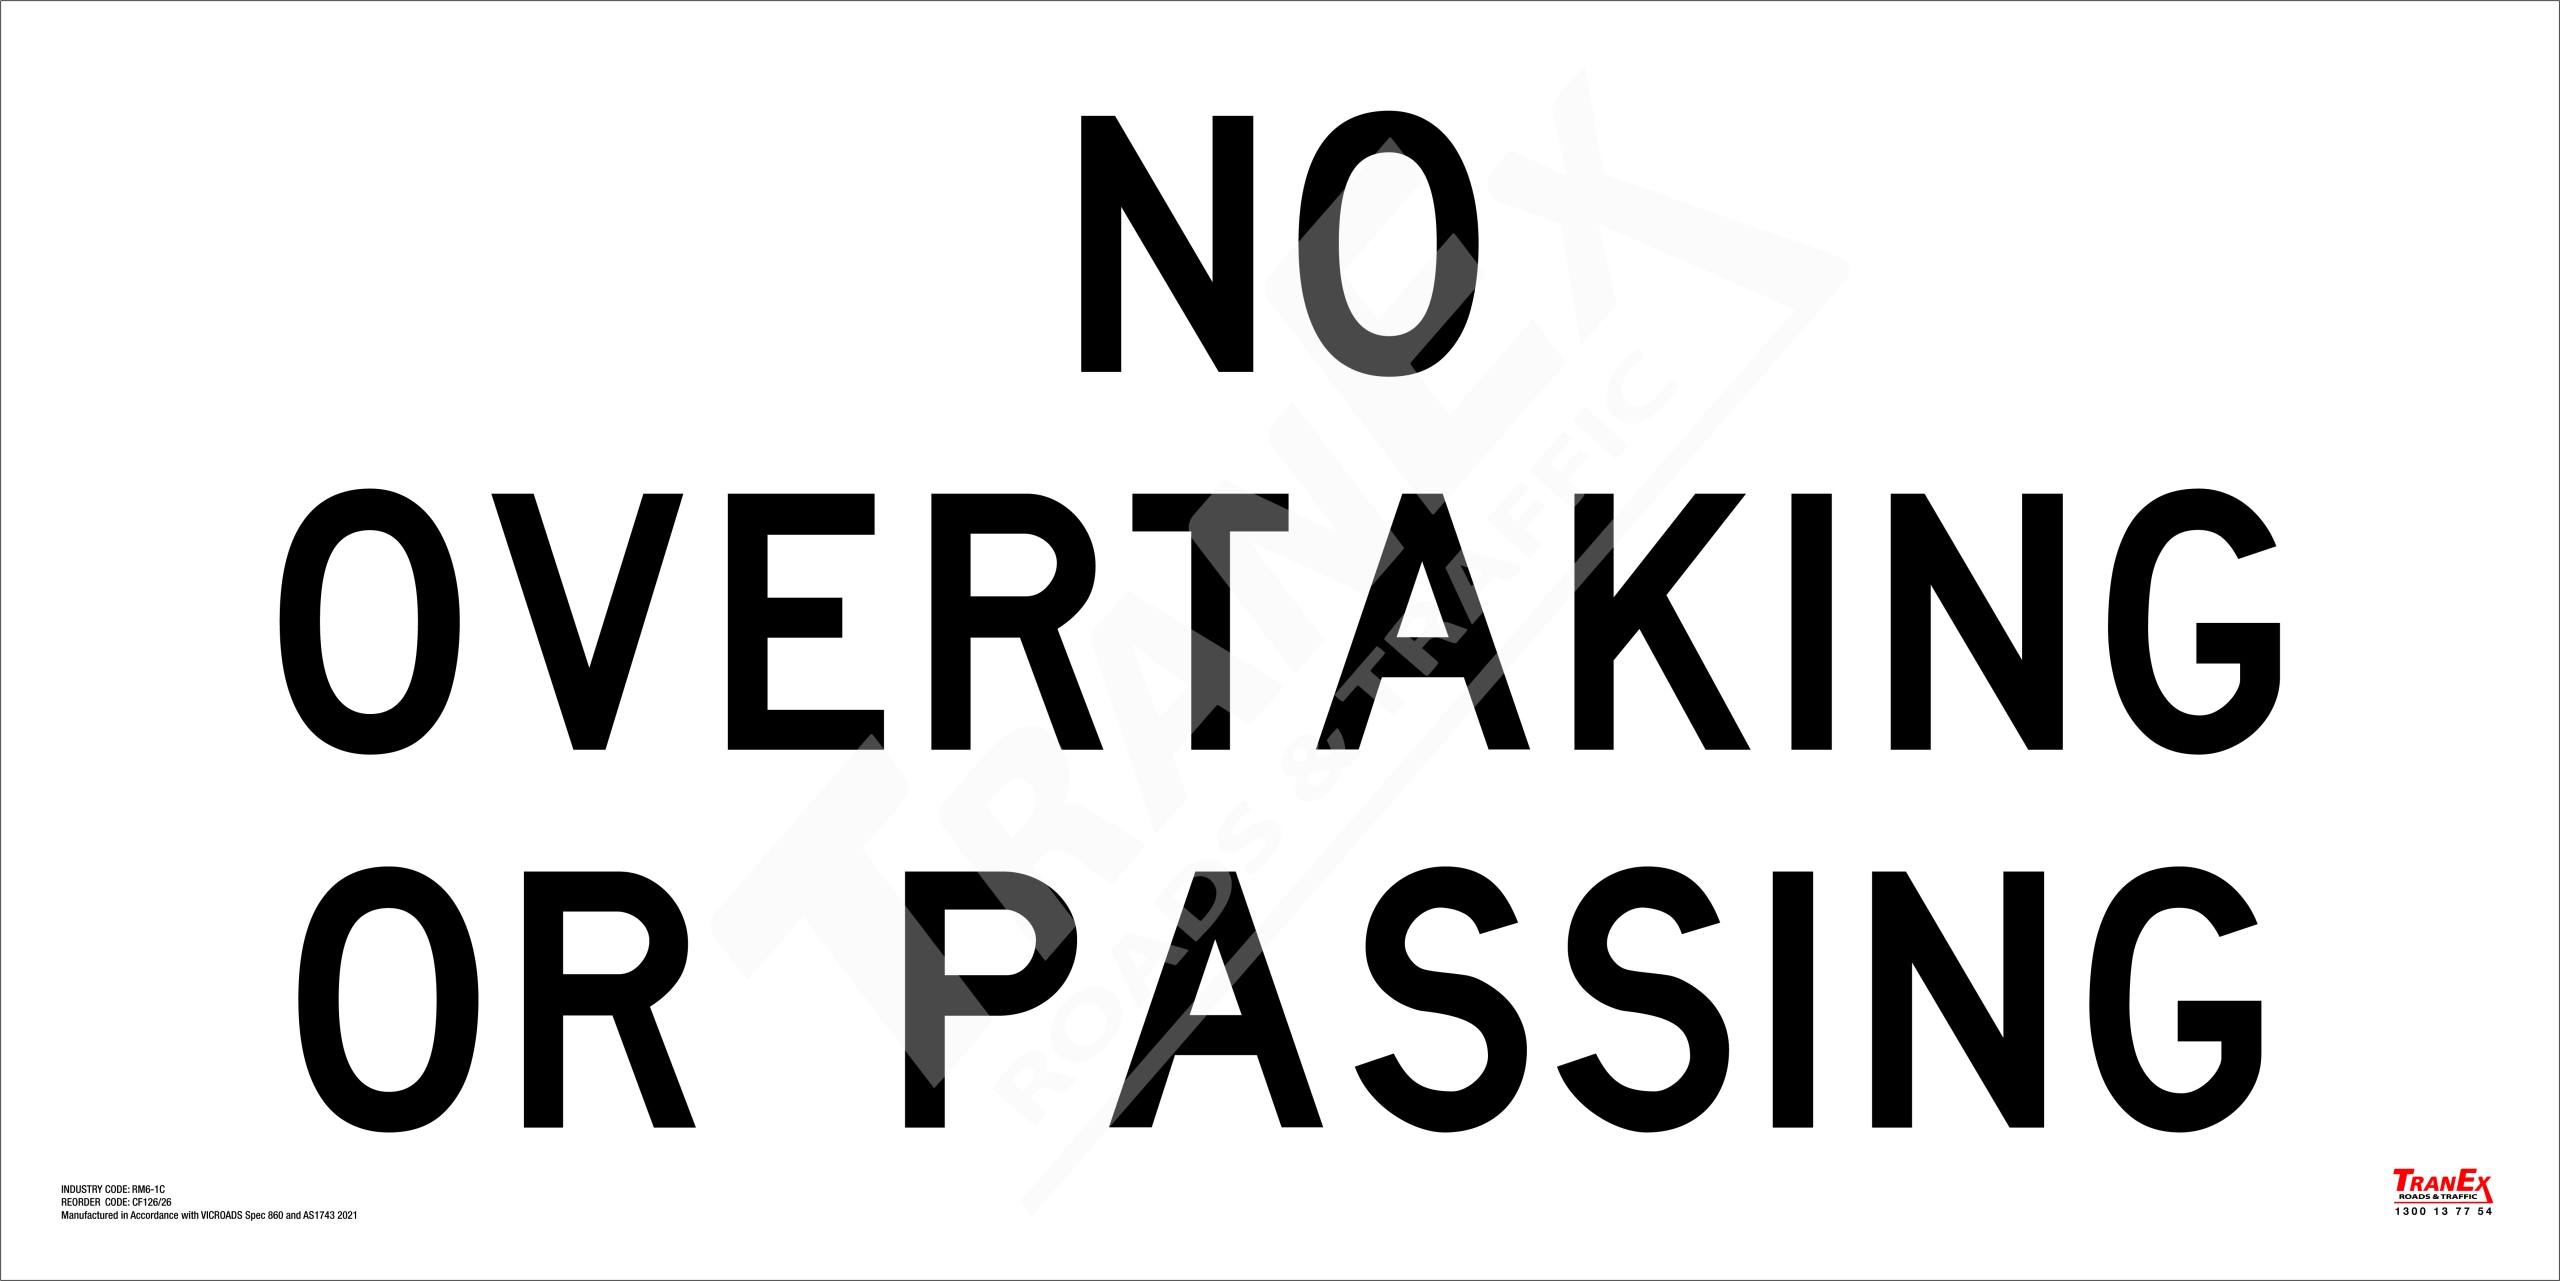 RM6-1C_NO OVERTAKING OR PASSING_1200x600